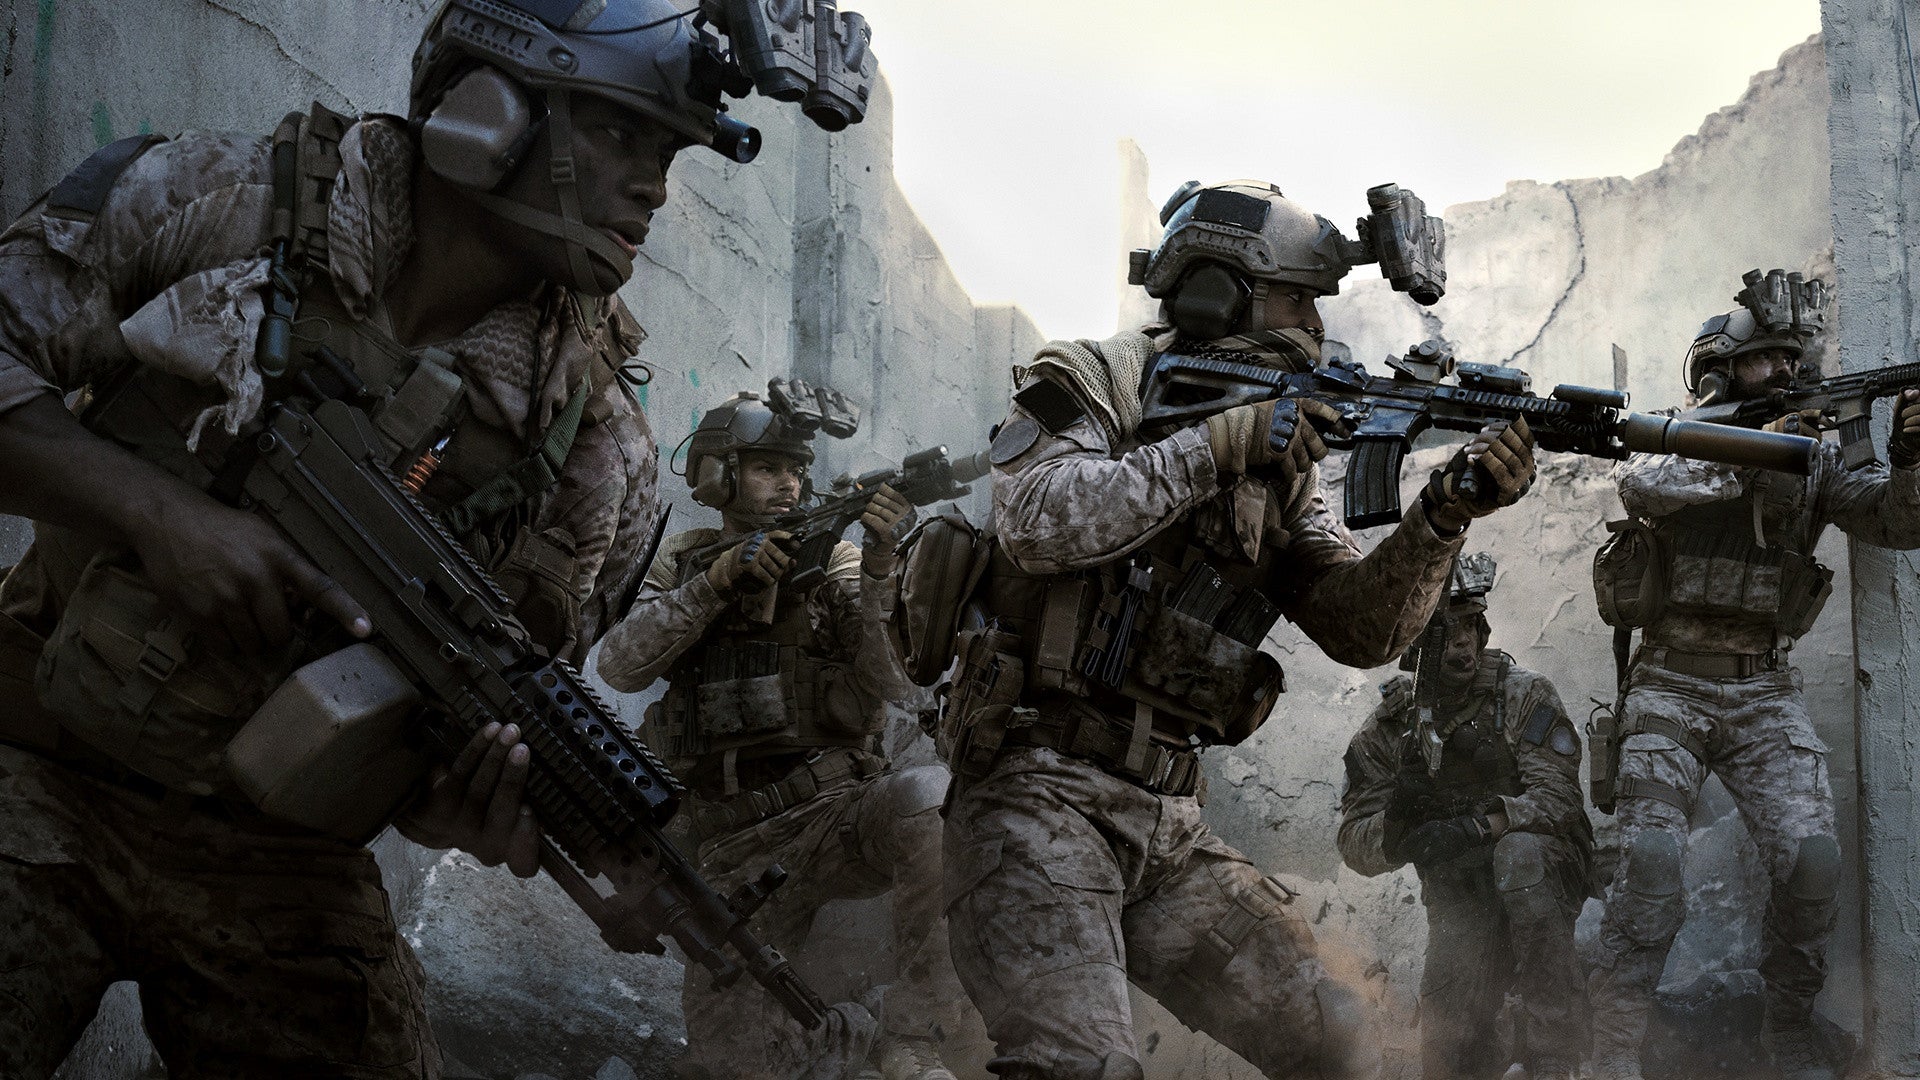 Image for Get a free PS4 and Call of Duty: Modern Warfare with a Sony Xperia phone